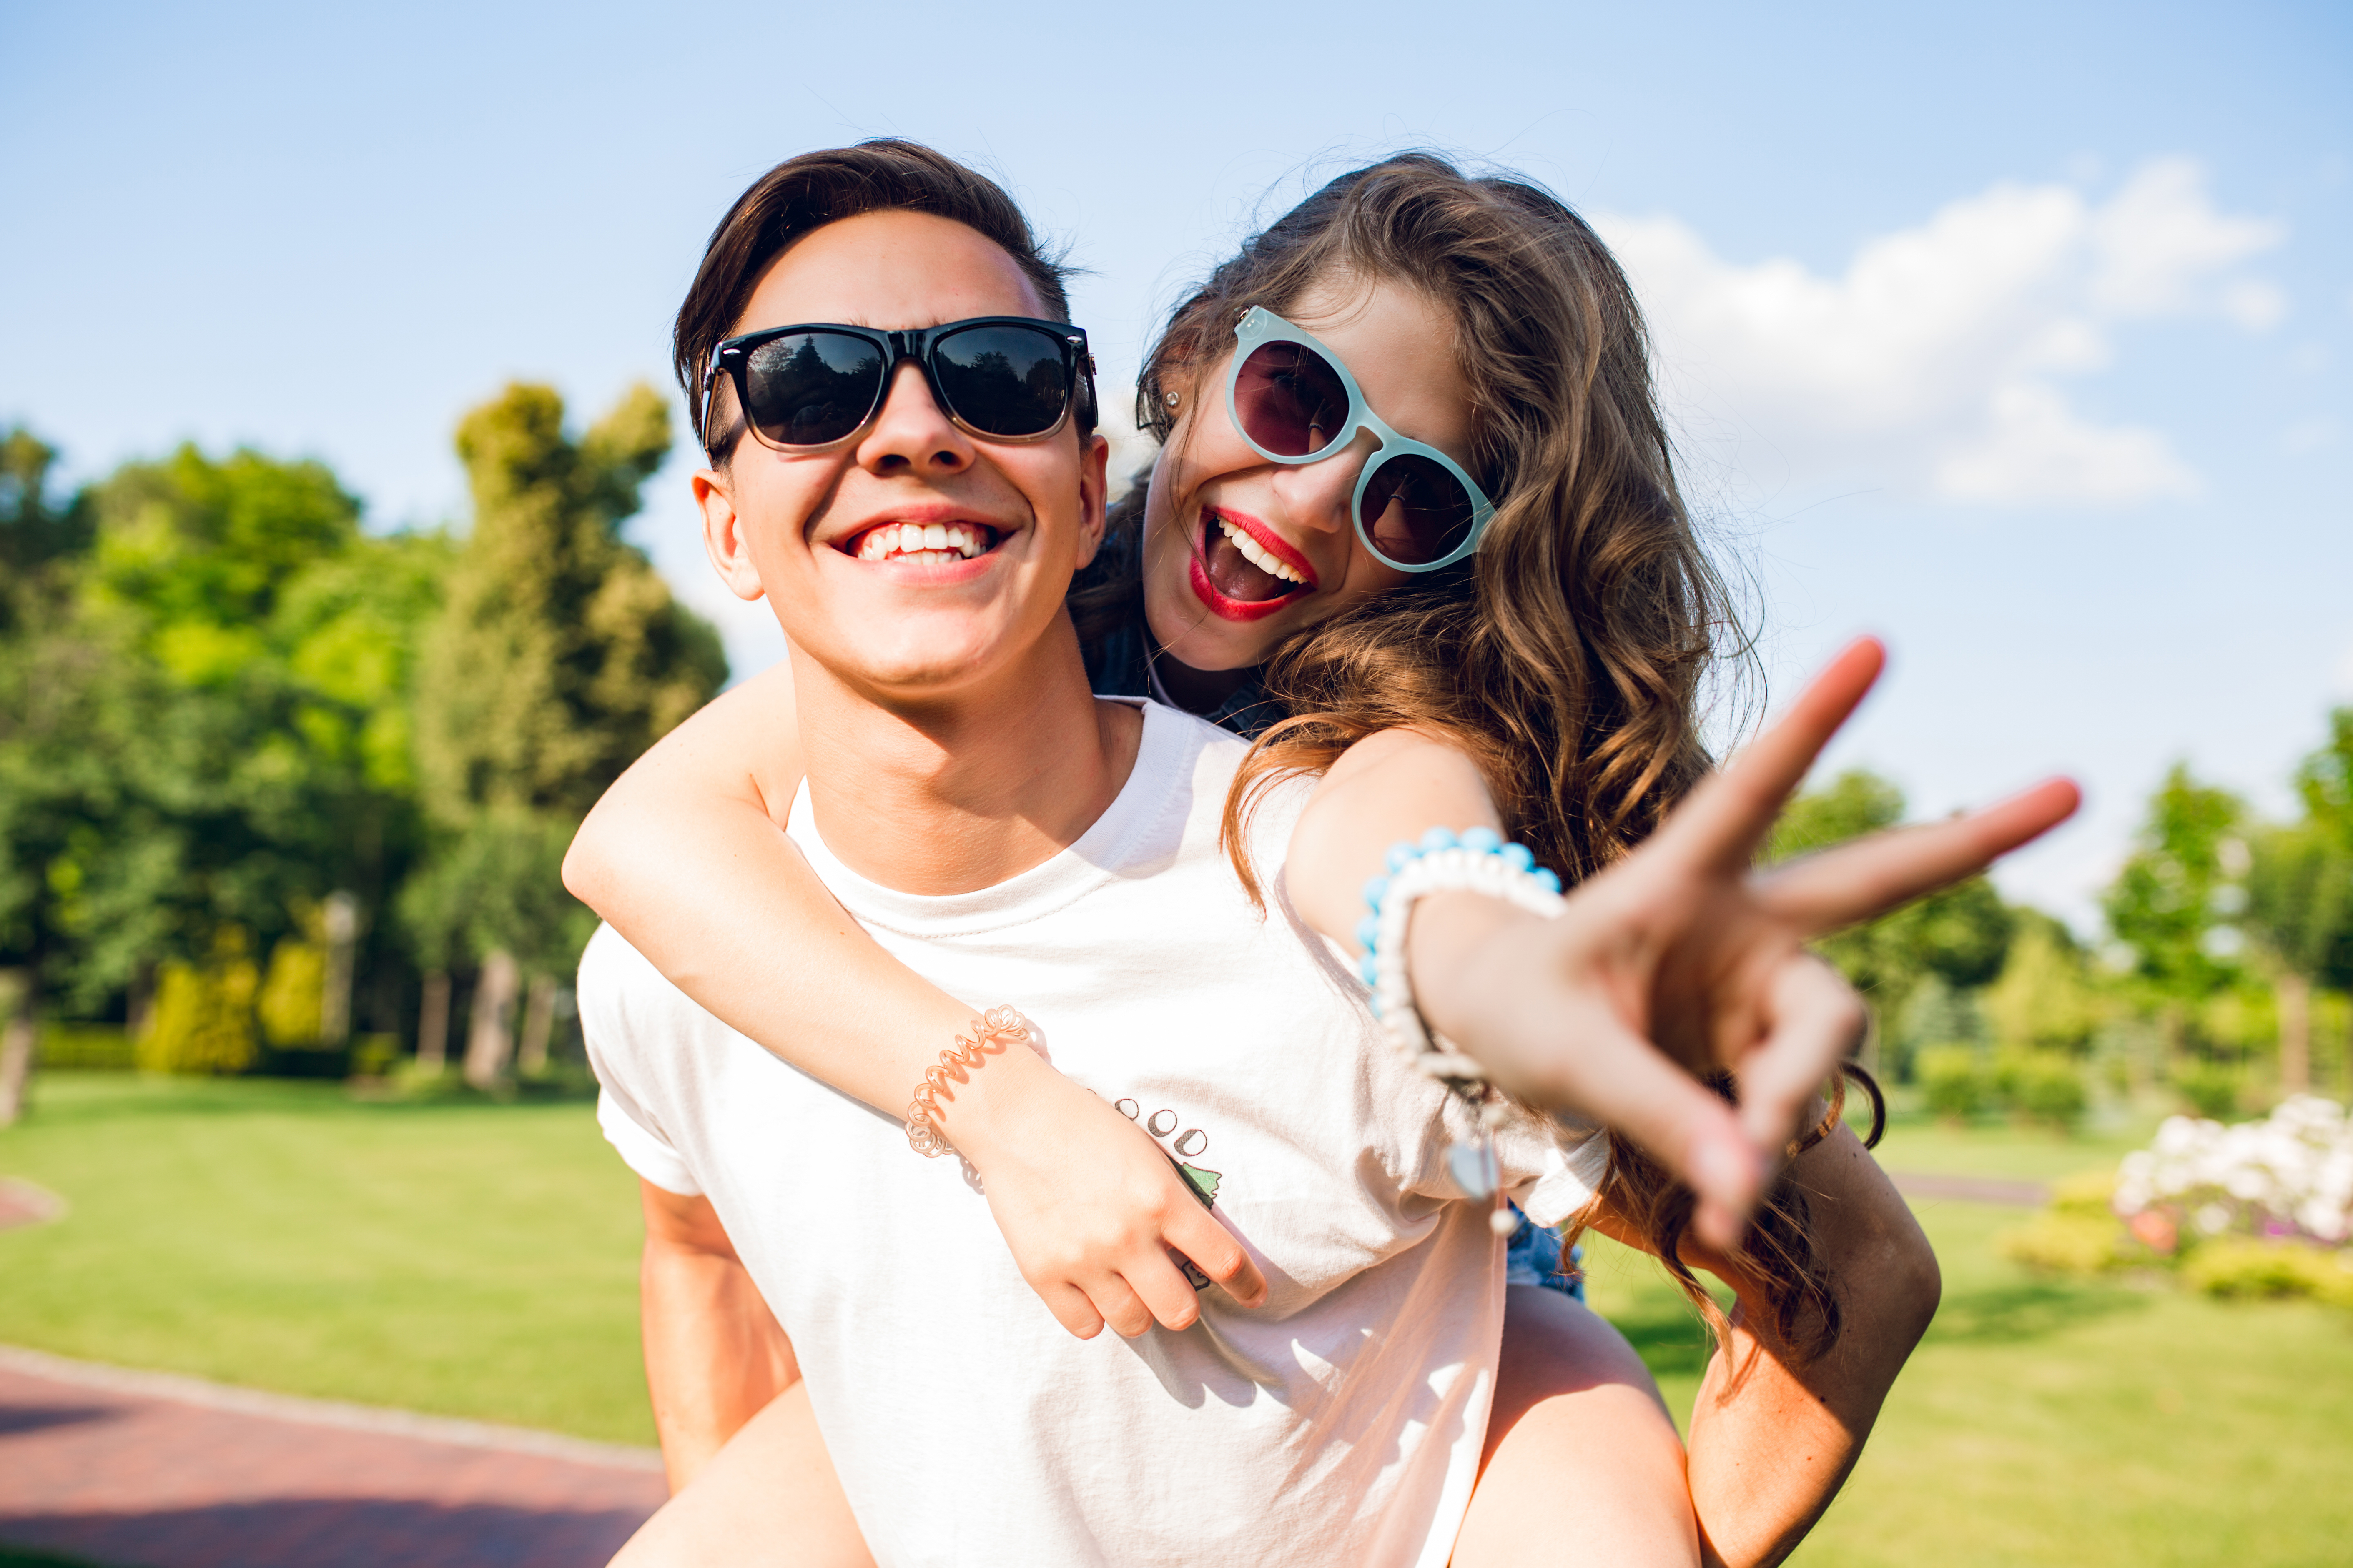 35 Lovable And Fun Things To Do For Your Boyfriend